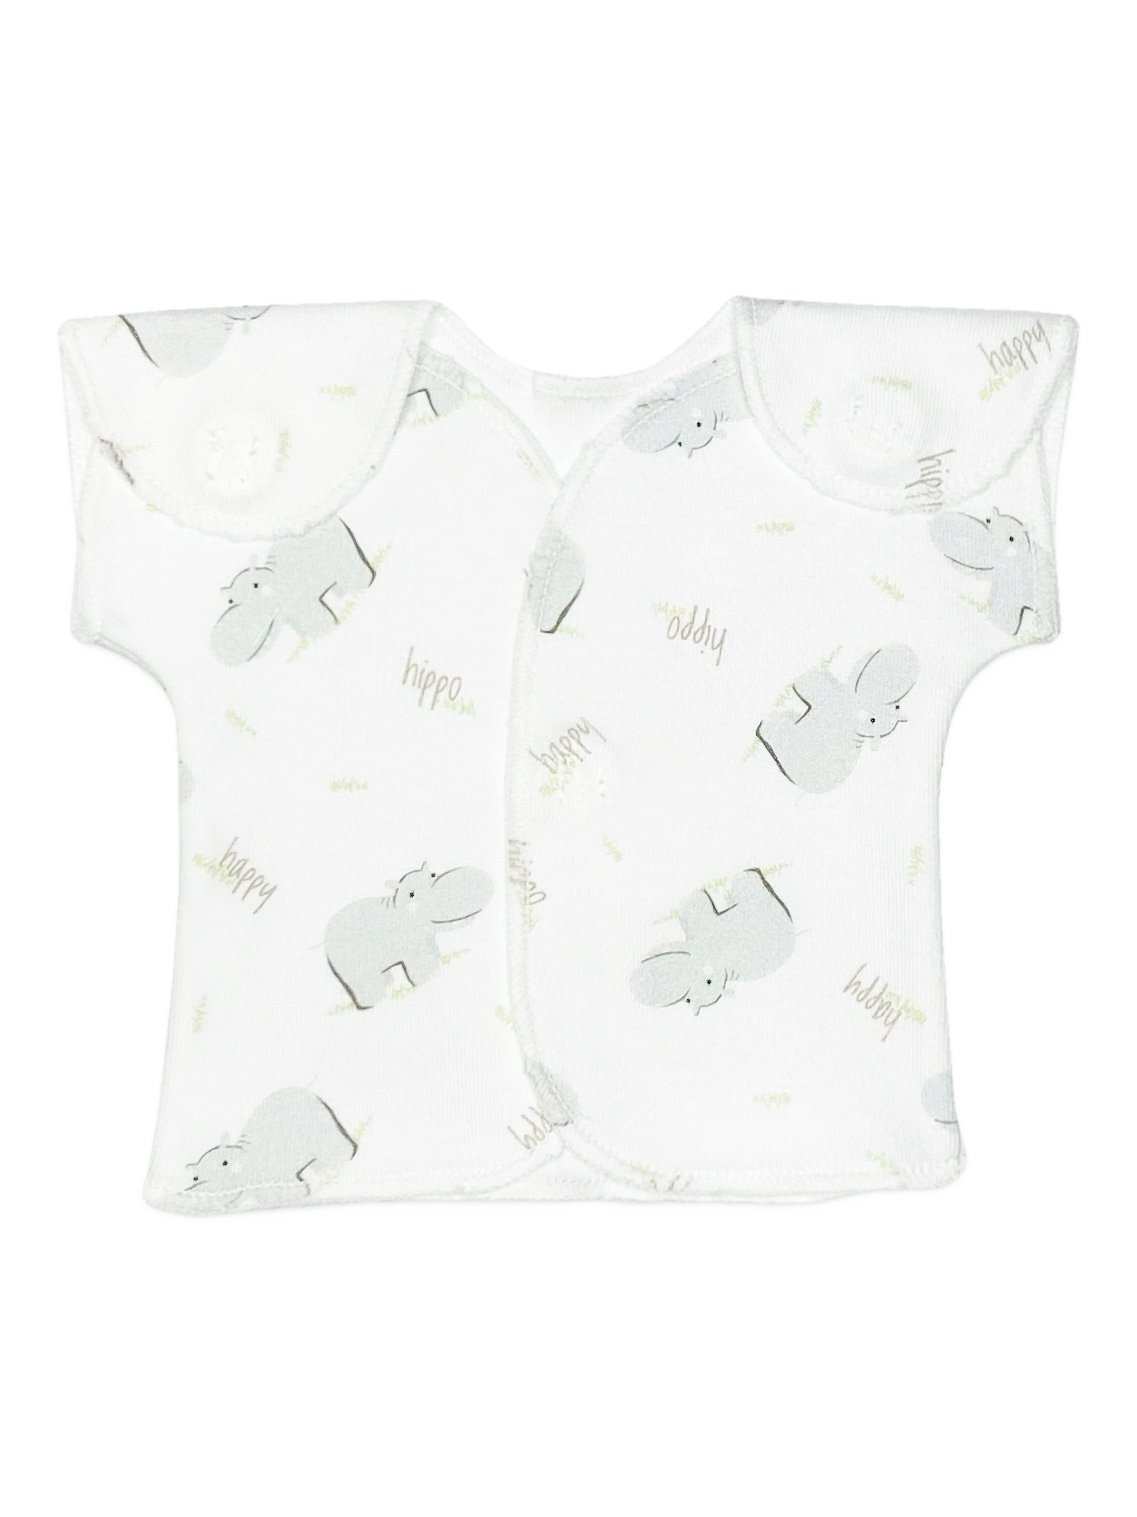 Wrap-over premature baby top, hippos Bodysuit / Vest Itty Bitty Baby Clothing 